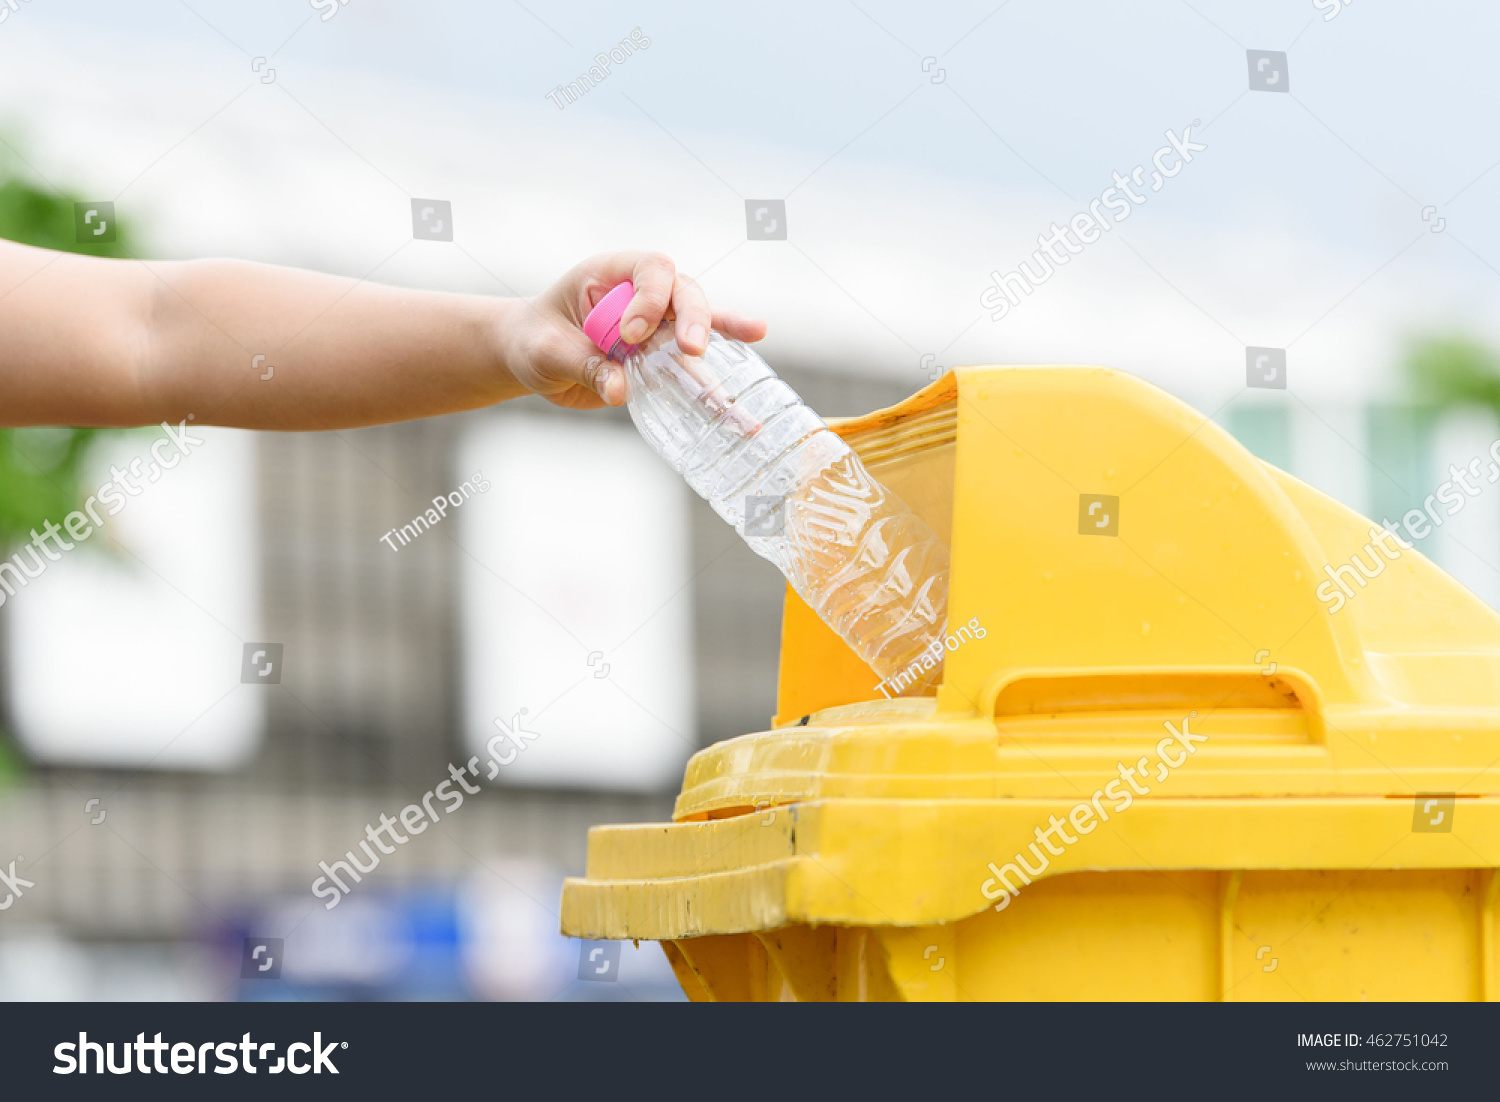 Selective focus on hand dropping empty plastic bottle to the yellow garbage bin. #462751042